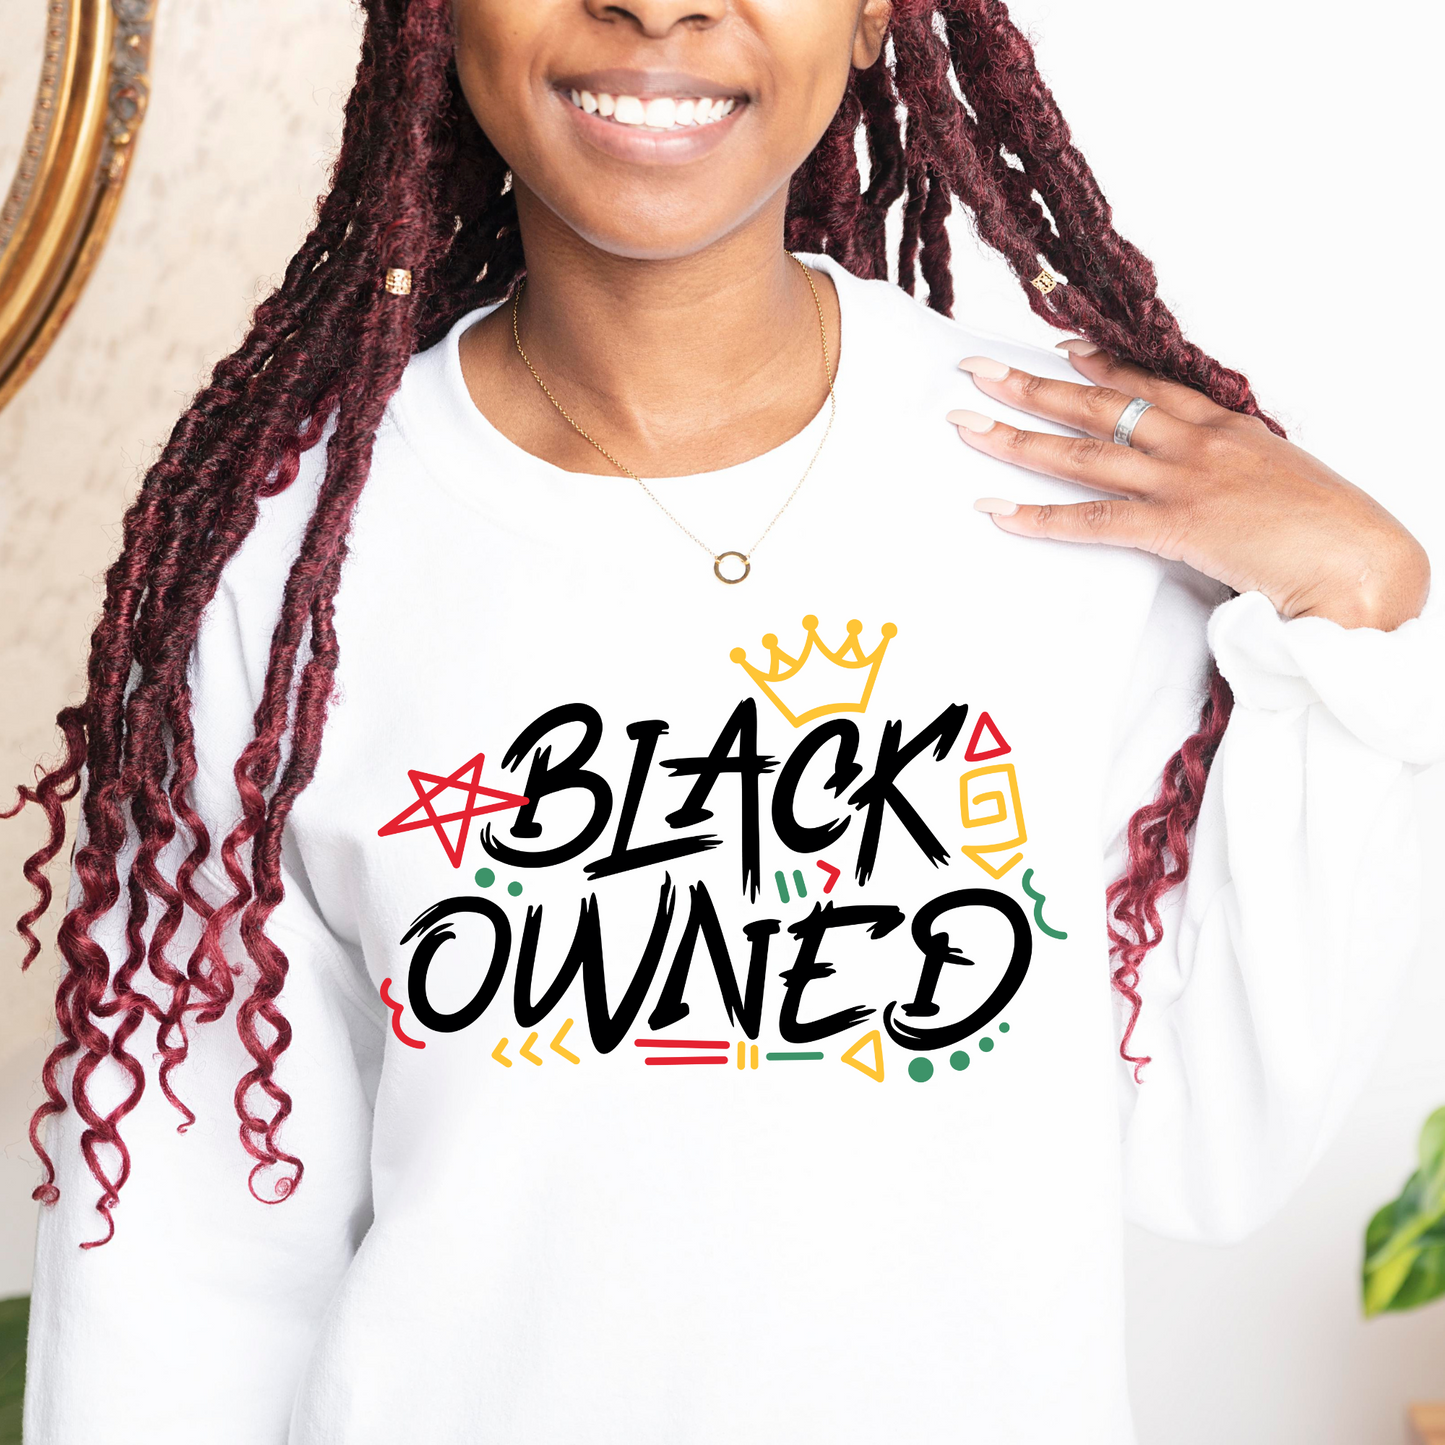 Black Owned